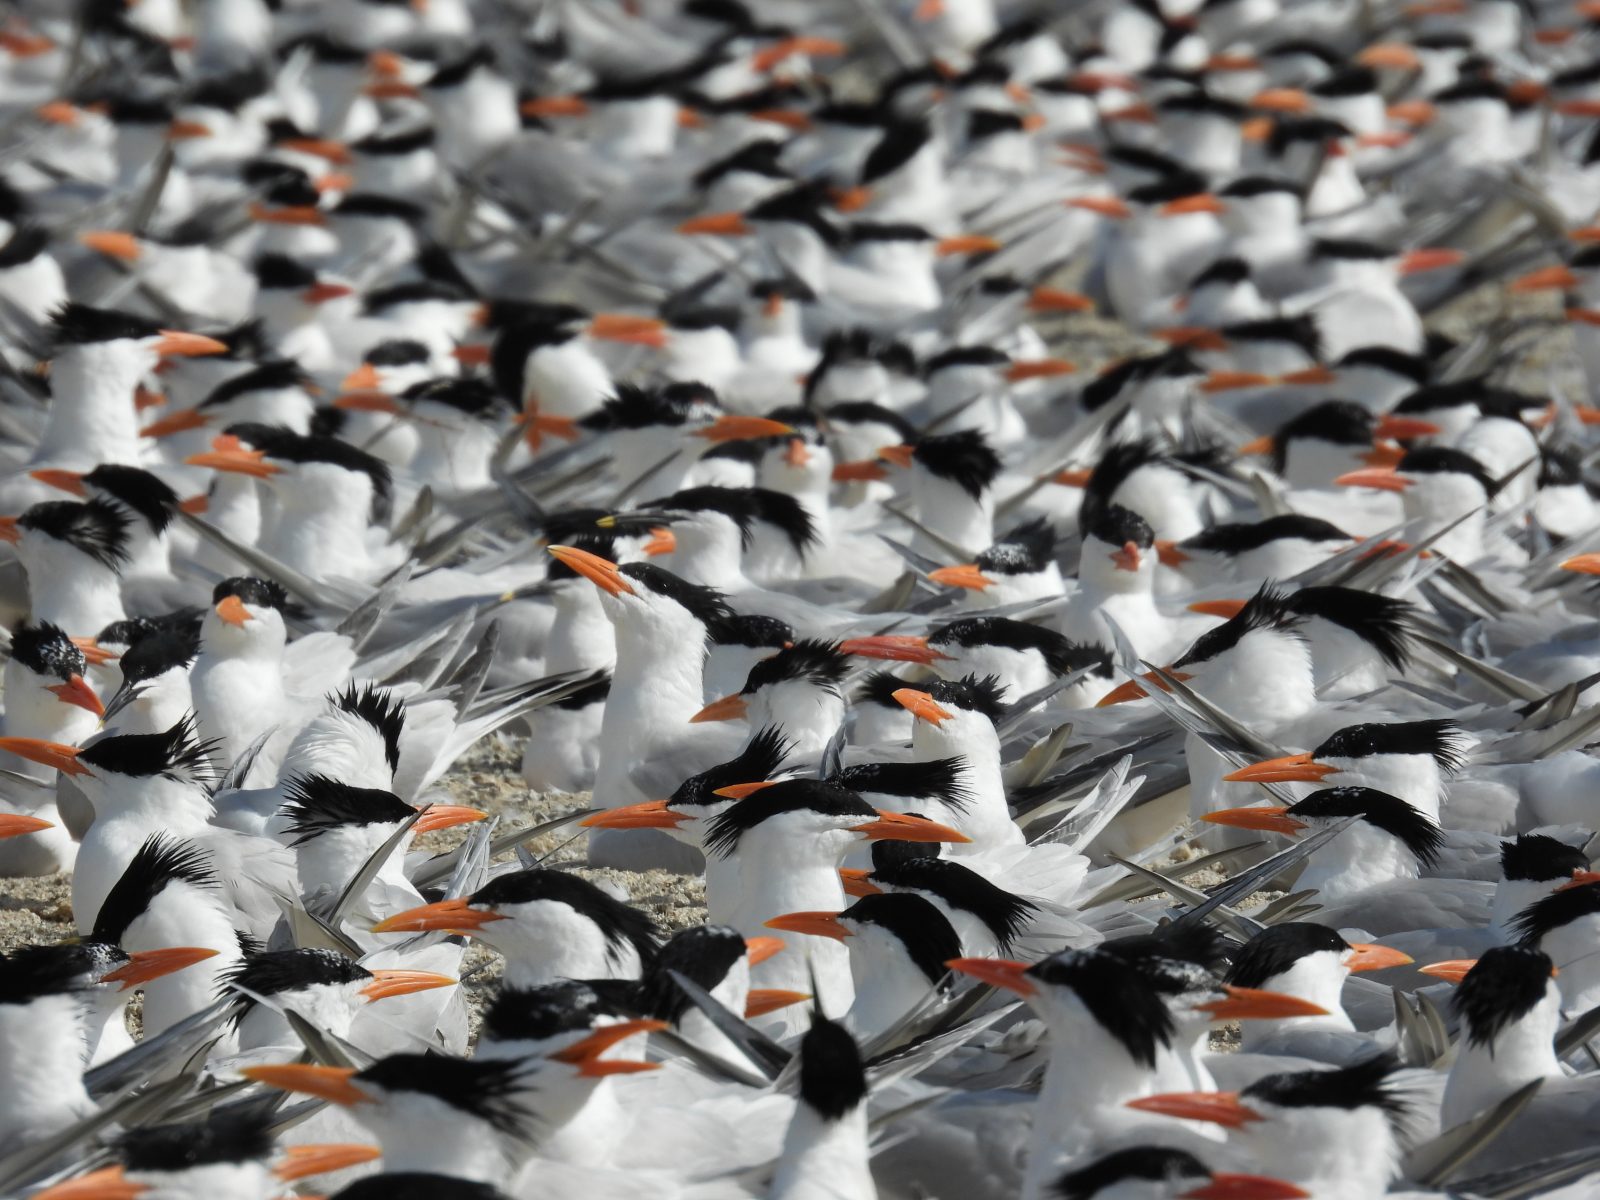 Close-up look at the nesting royal tern colony on Ft. Wool